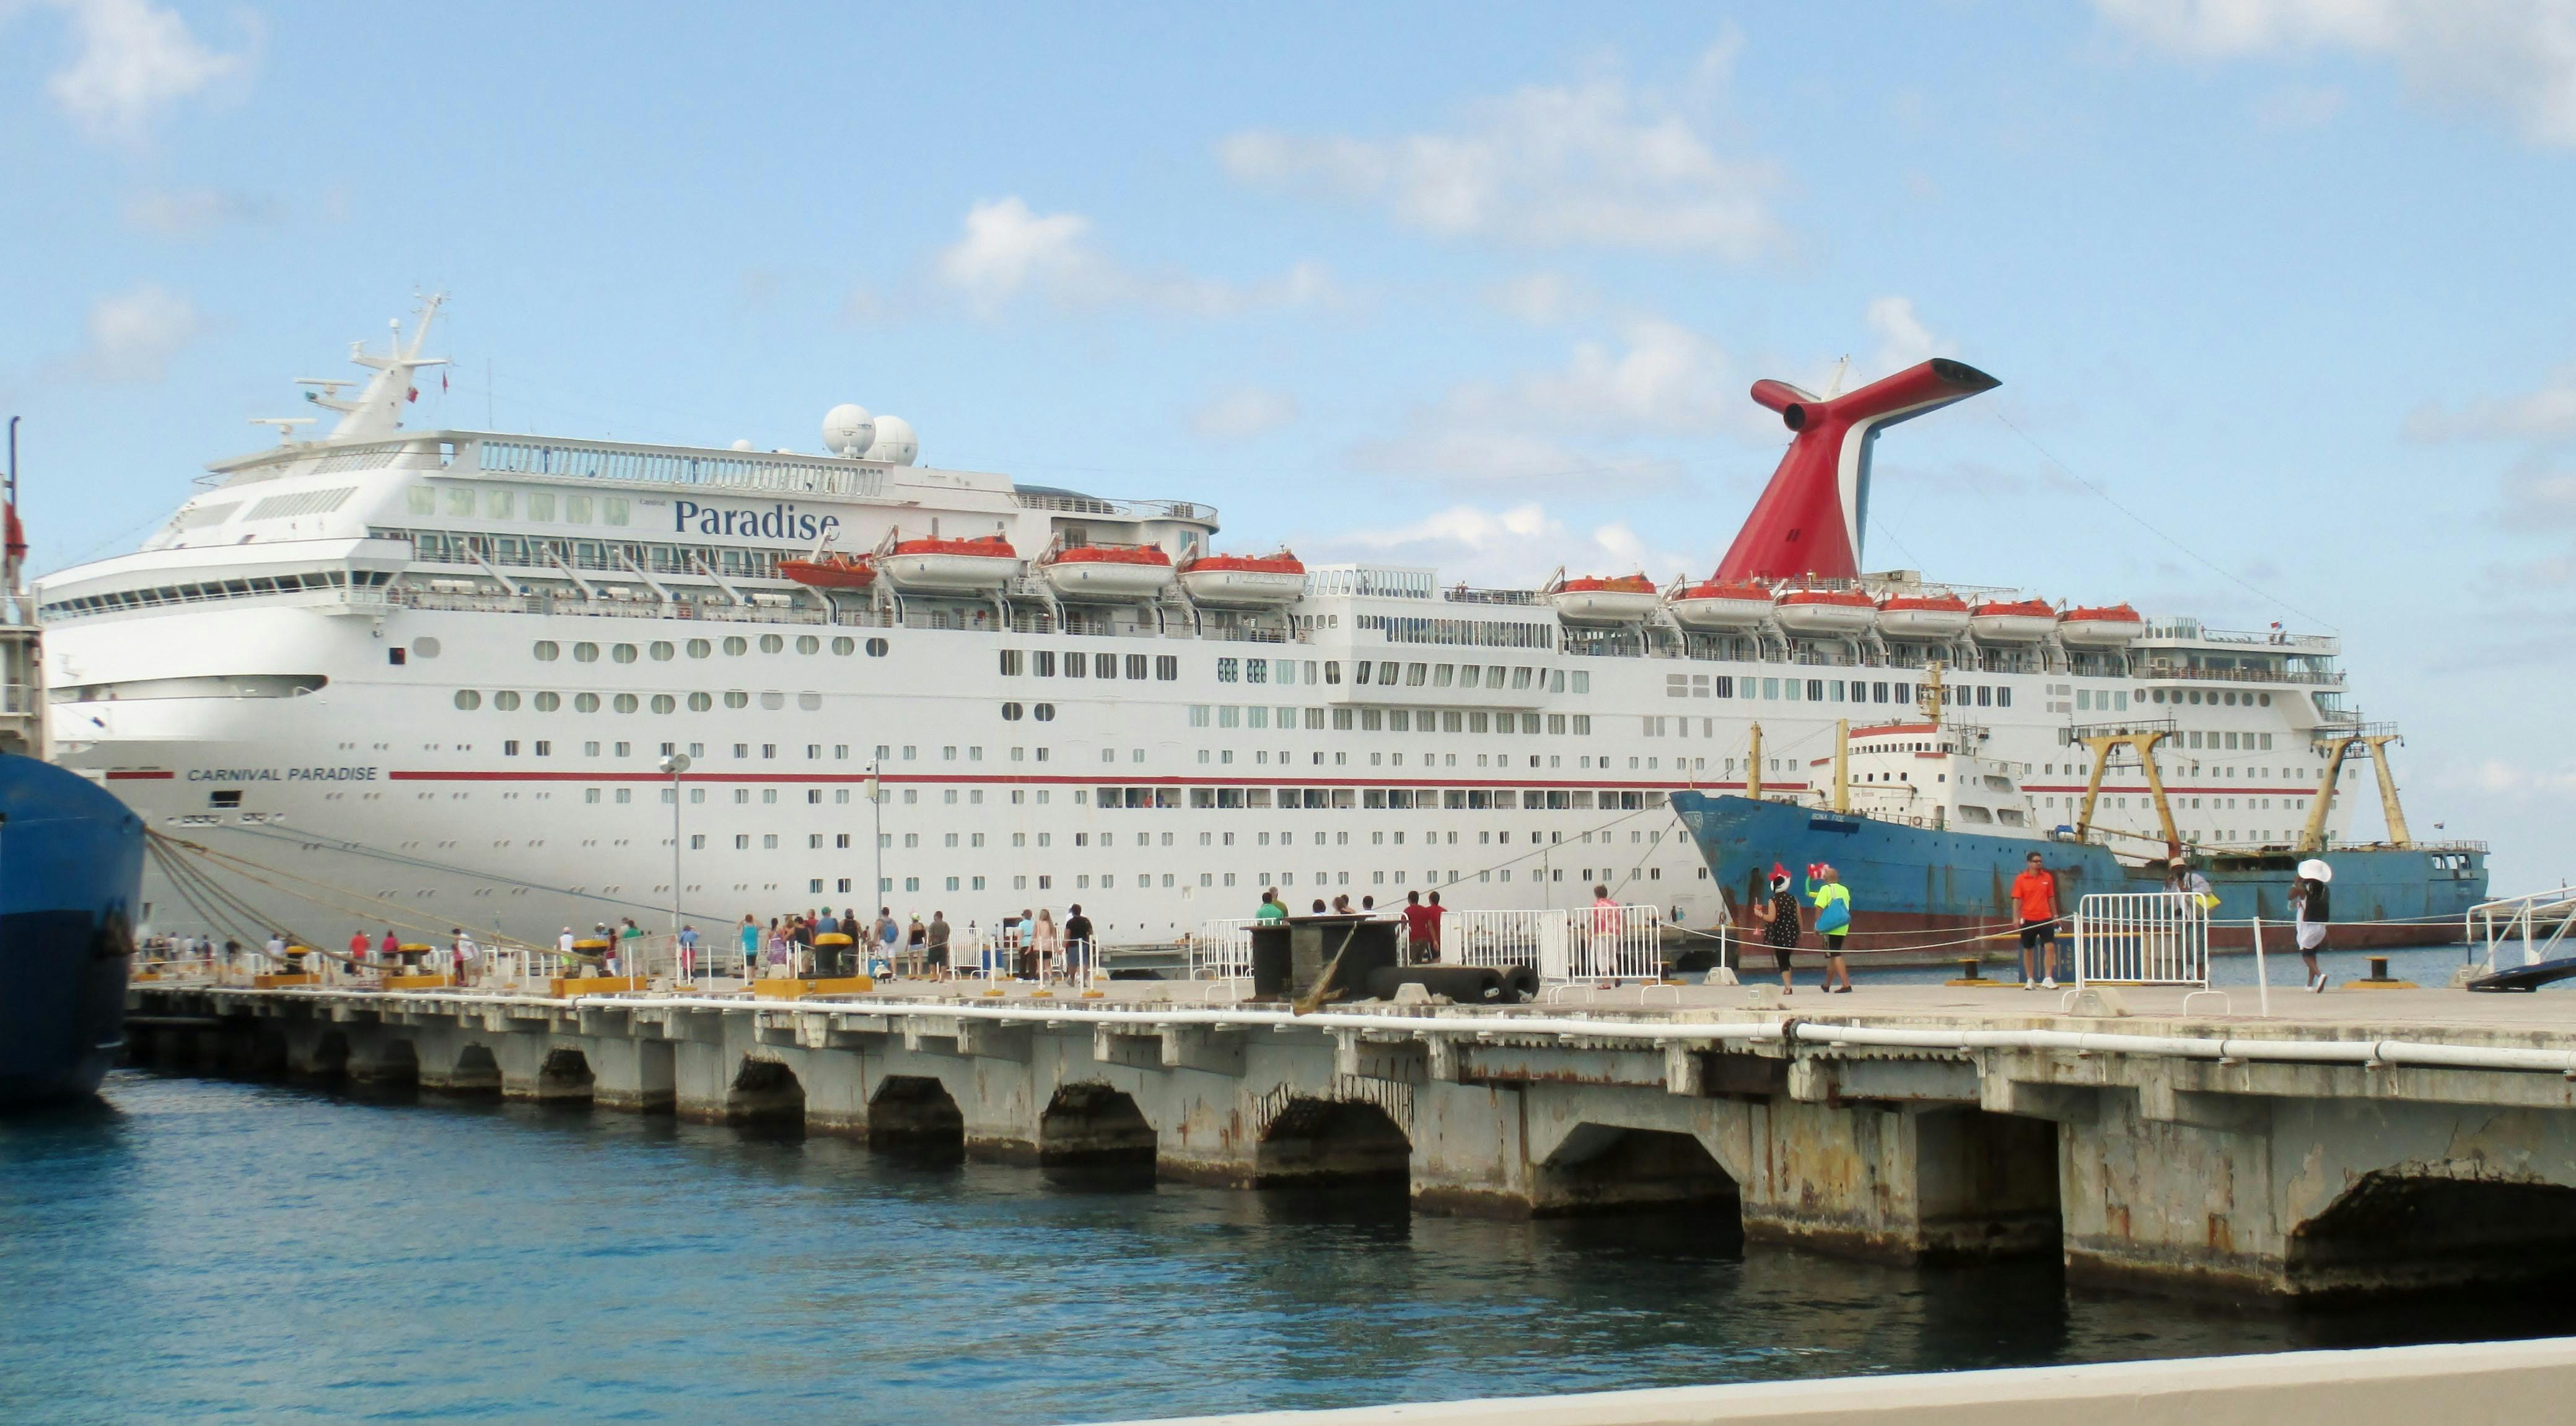 Carnival Paradise Cruise Review by dib January 25, 2014